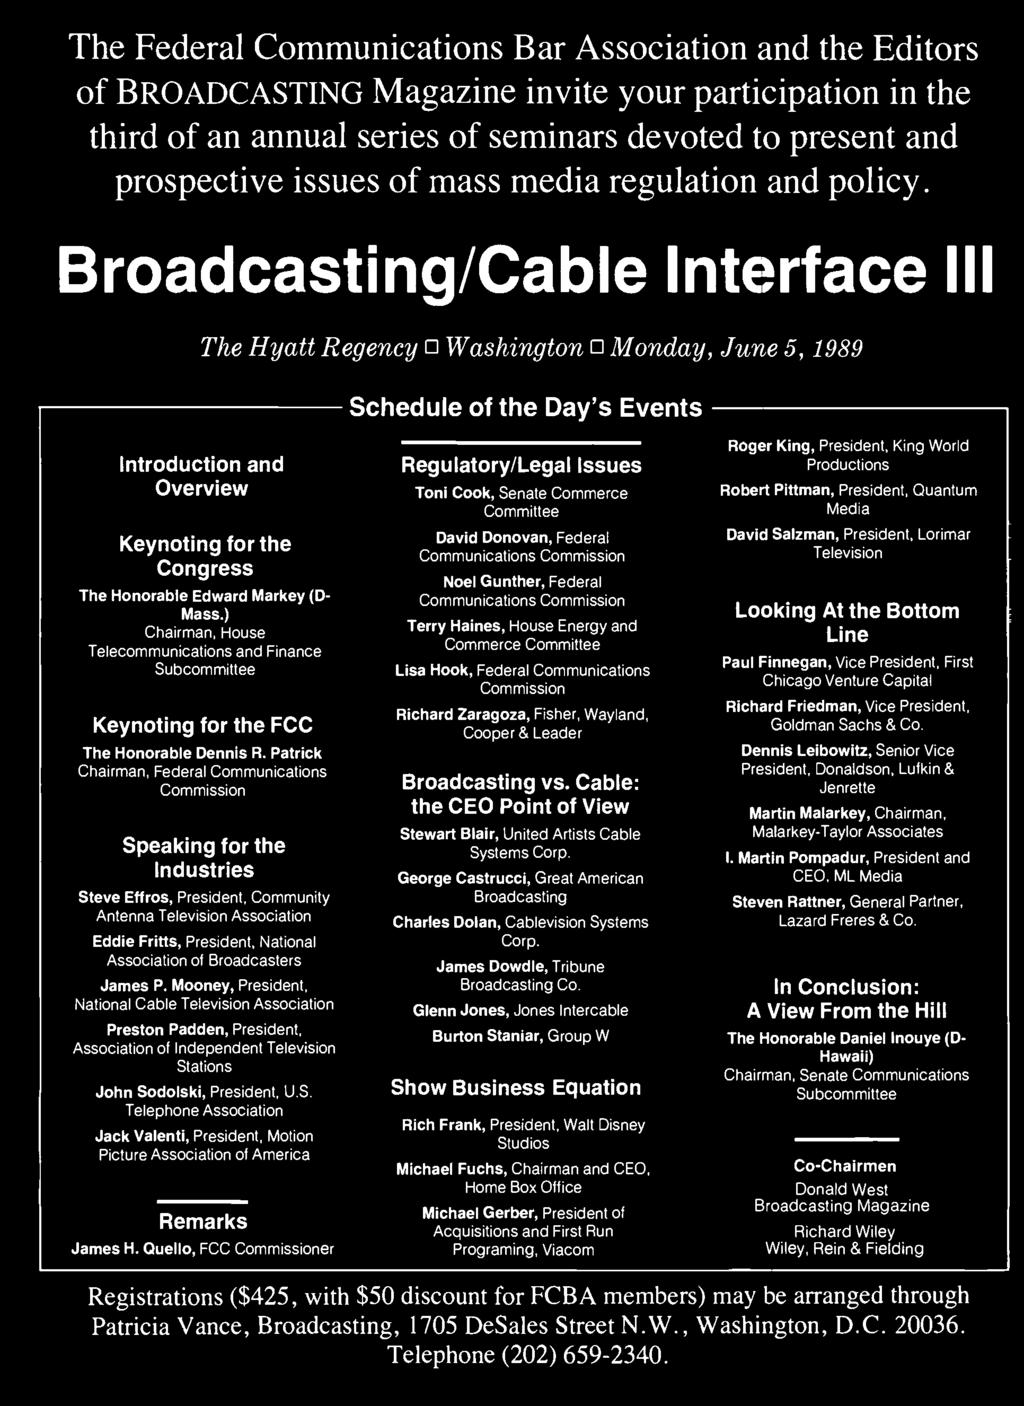 Broadcasting /Cable Interface III The Hyatt Regency Washington Monday, June 5, 1989 Schedule of the Day's Events Introduction and Overview Keynoting for the Congress The Honorable Edward Markey (D-